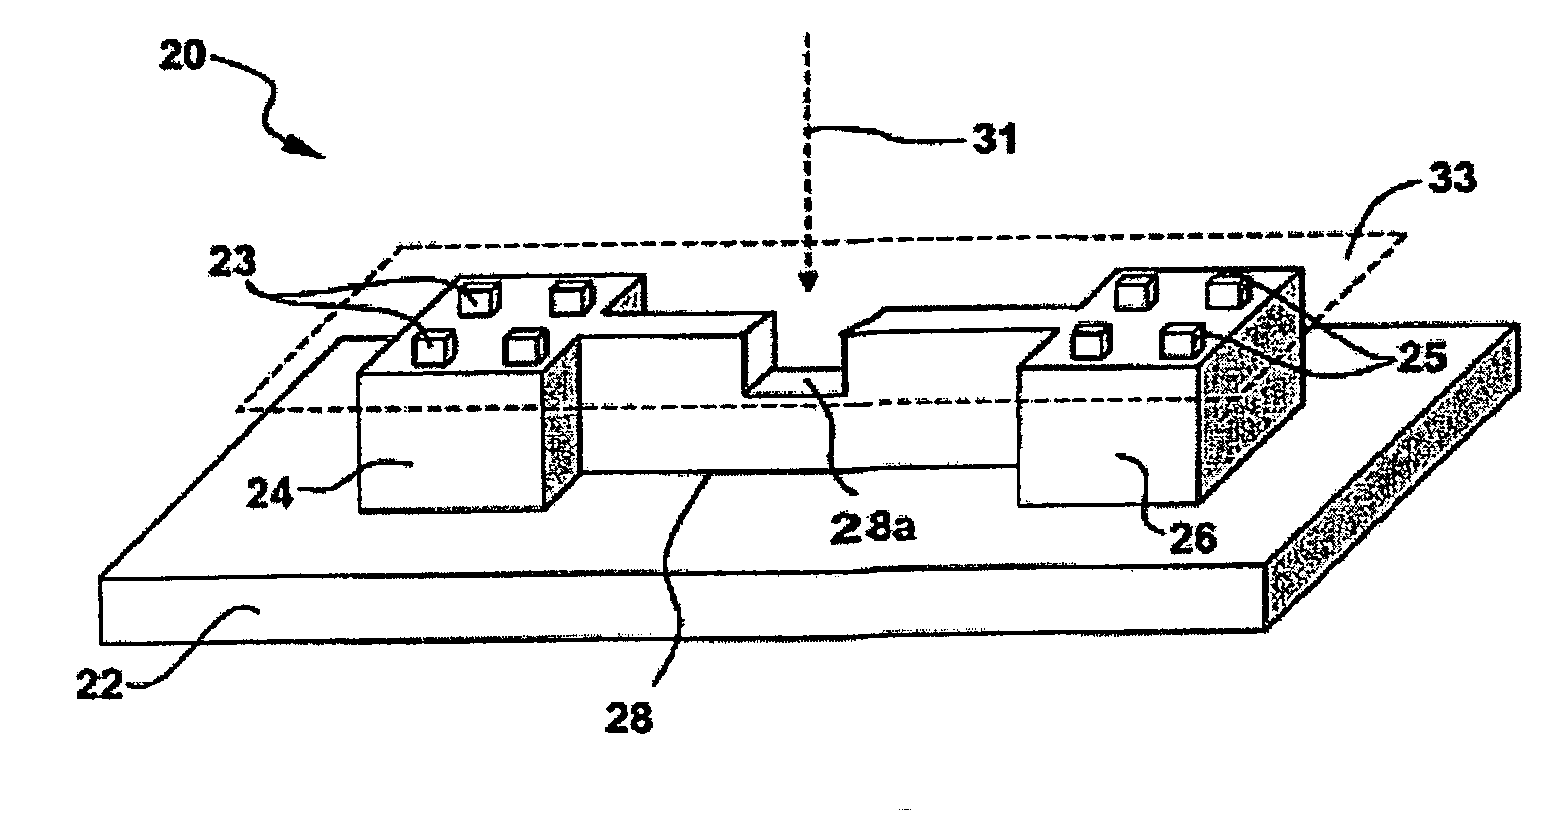 Programmable semiconductor device containing a vertically notched fusible link region and methods of making and using same